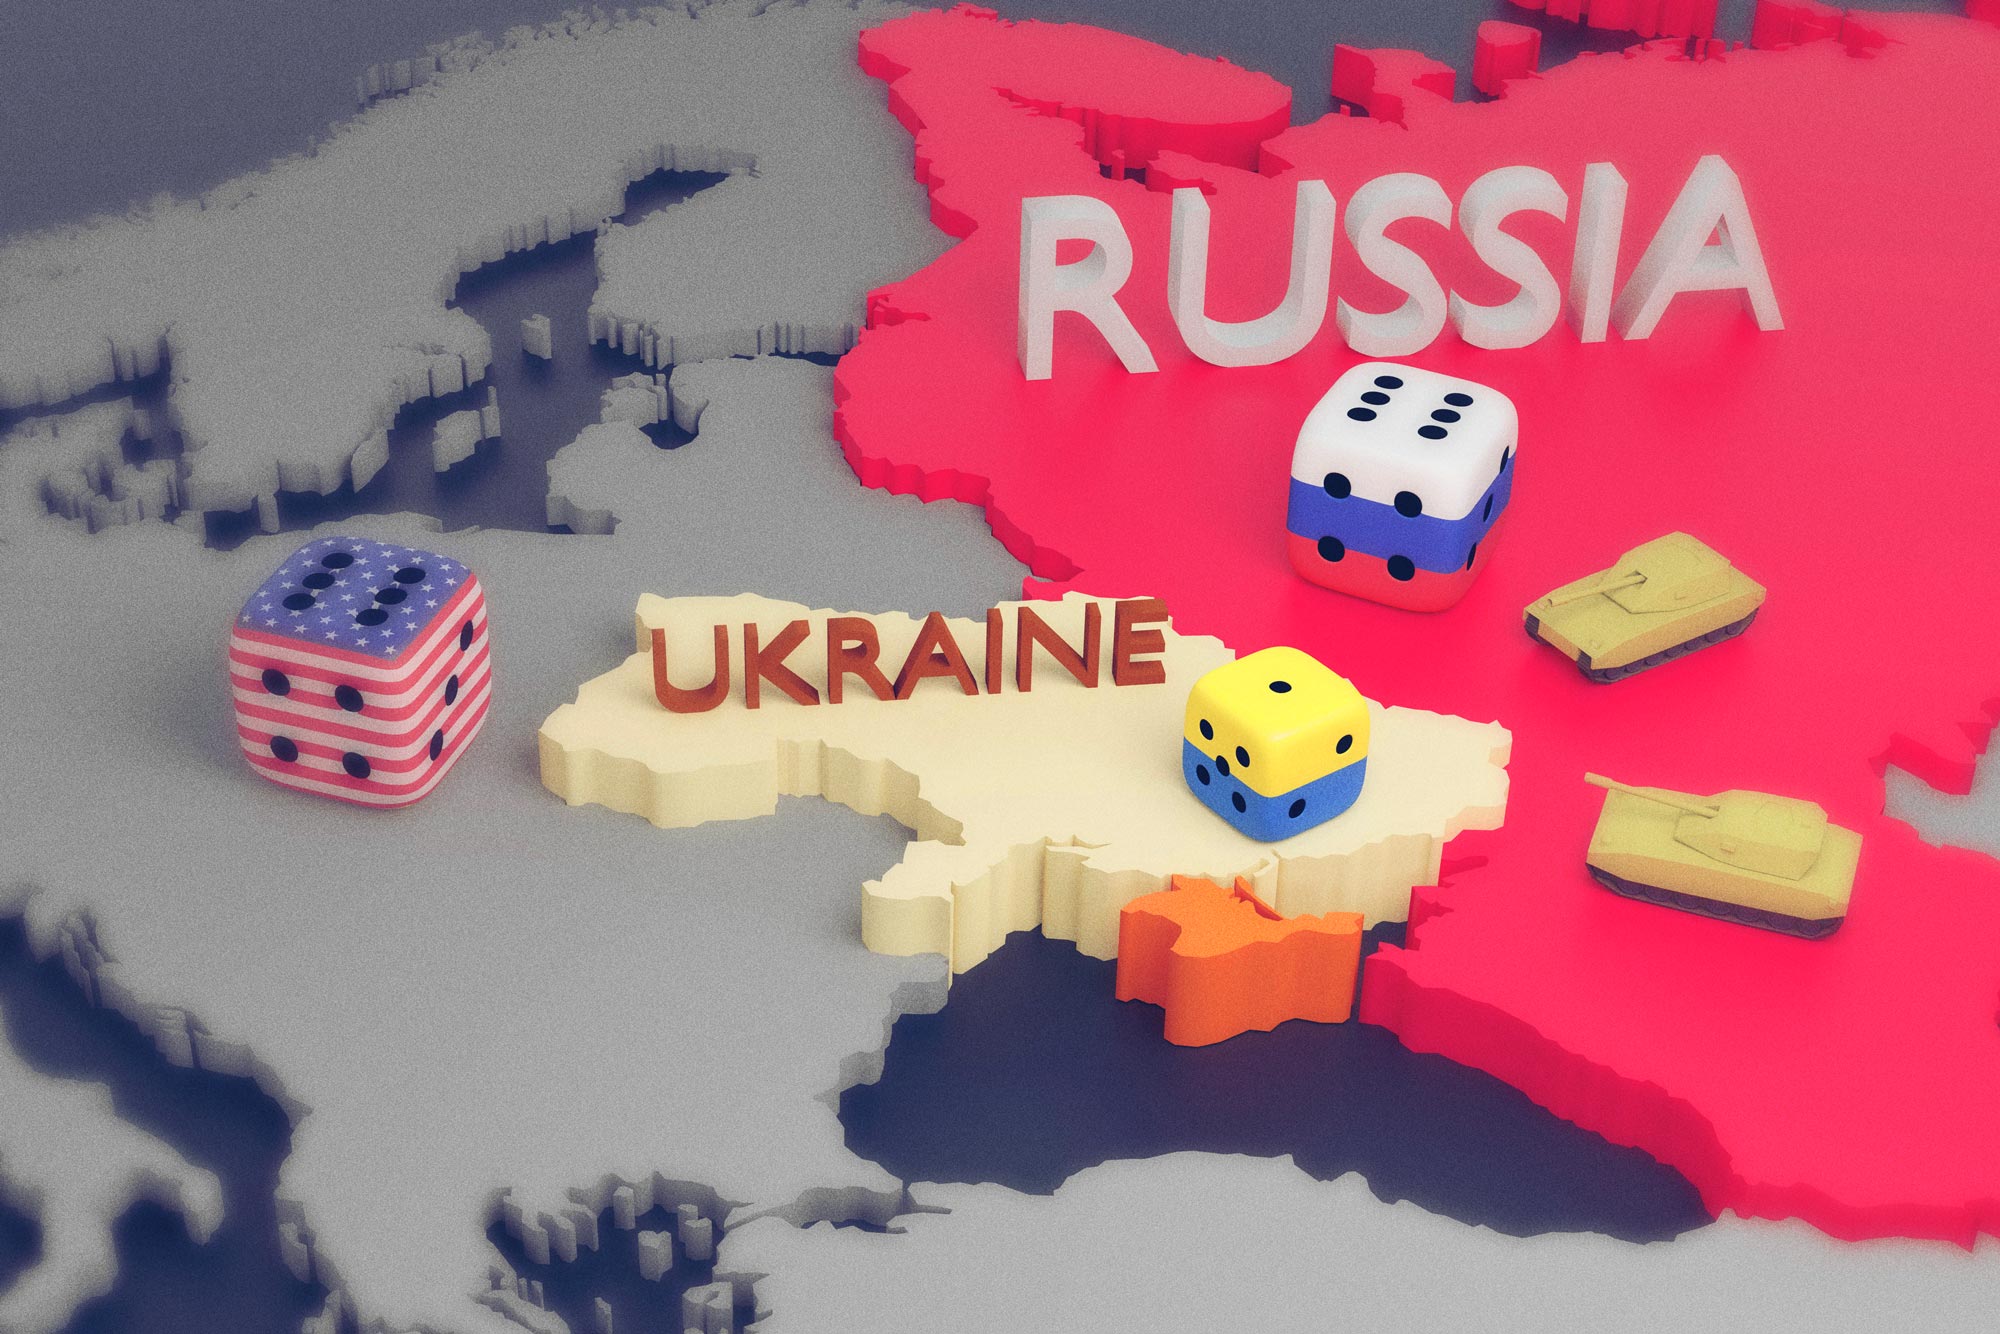 U.S. and Russian flag decorated dice each with a six, and a Ukraine flag die with a 1.